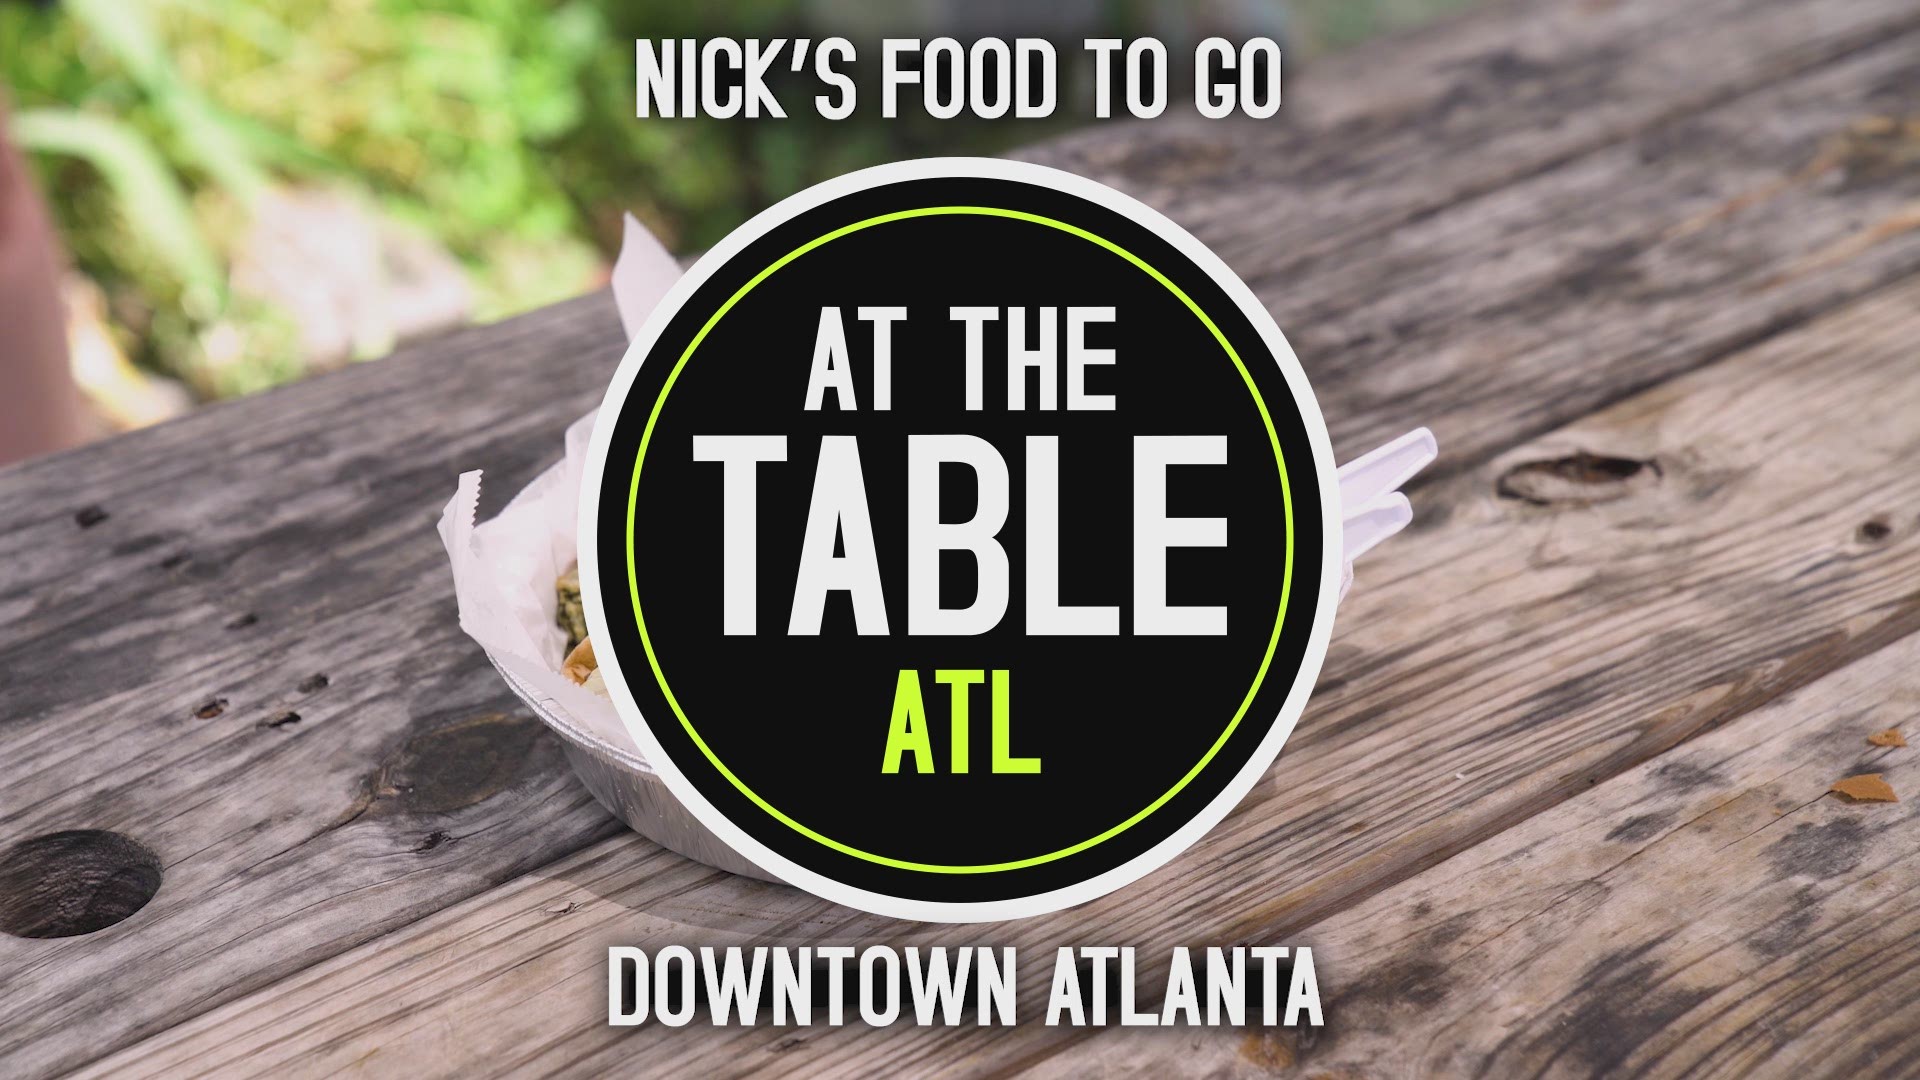 25 years later, Nick’s Food To Go is an Atlanta staple for authentic Greek food